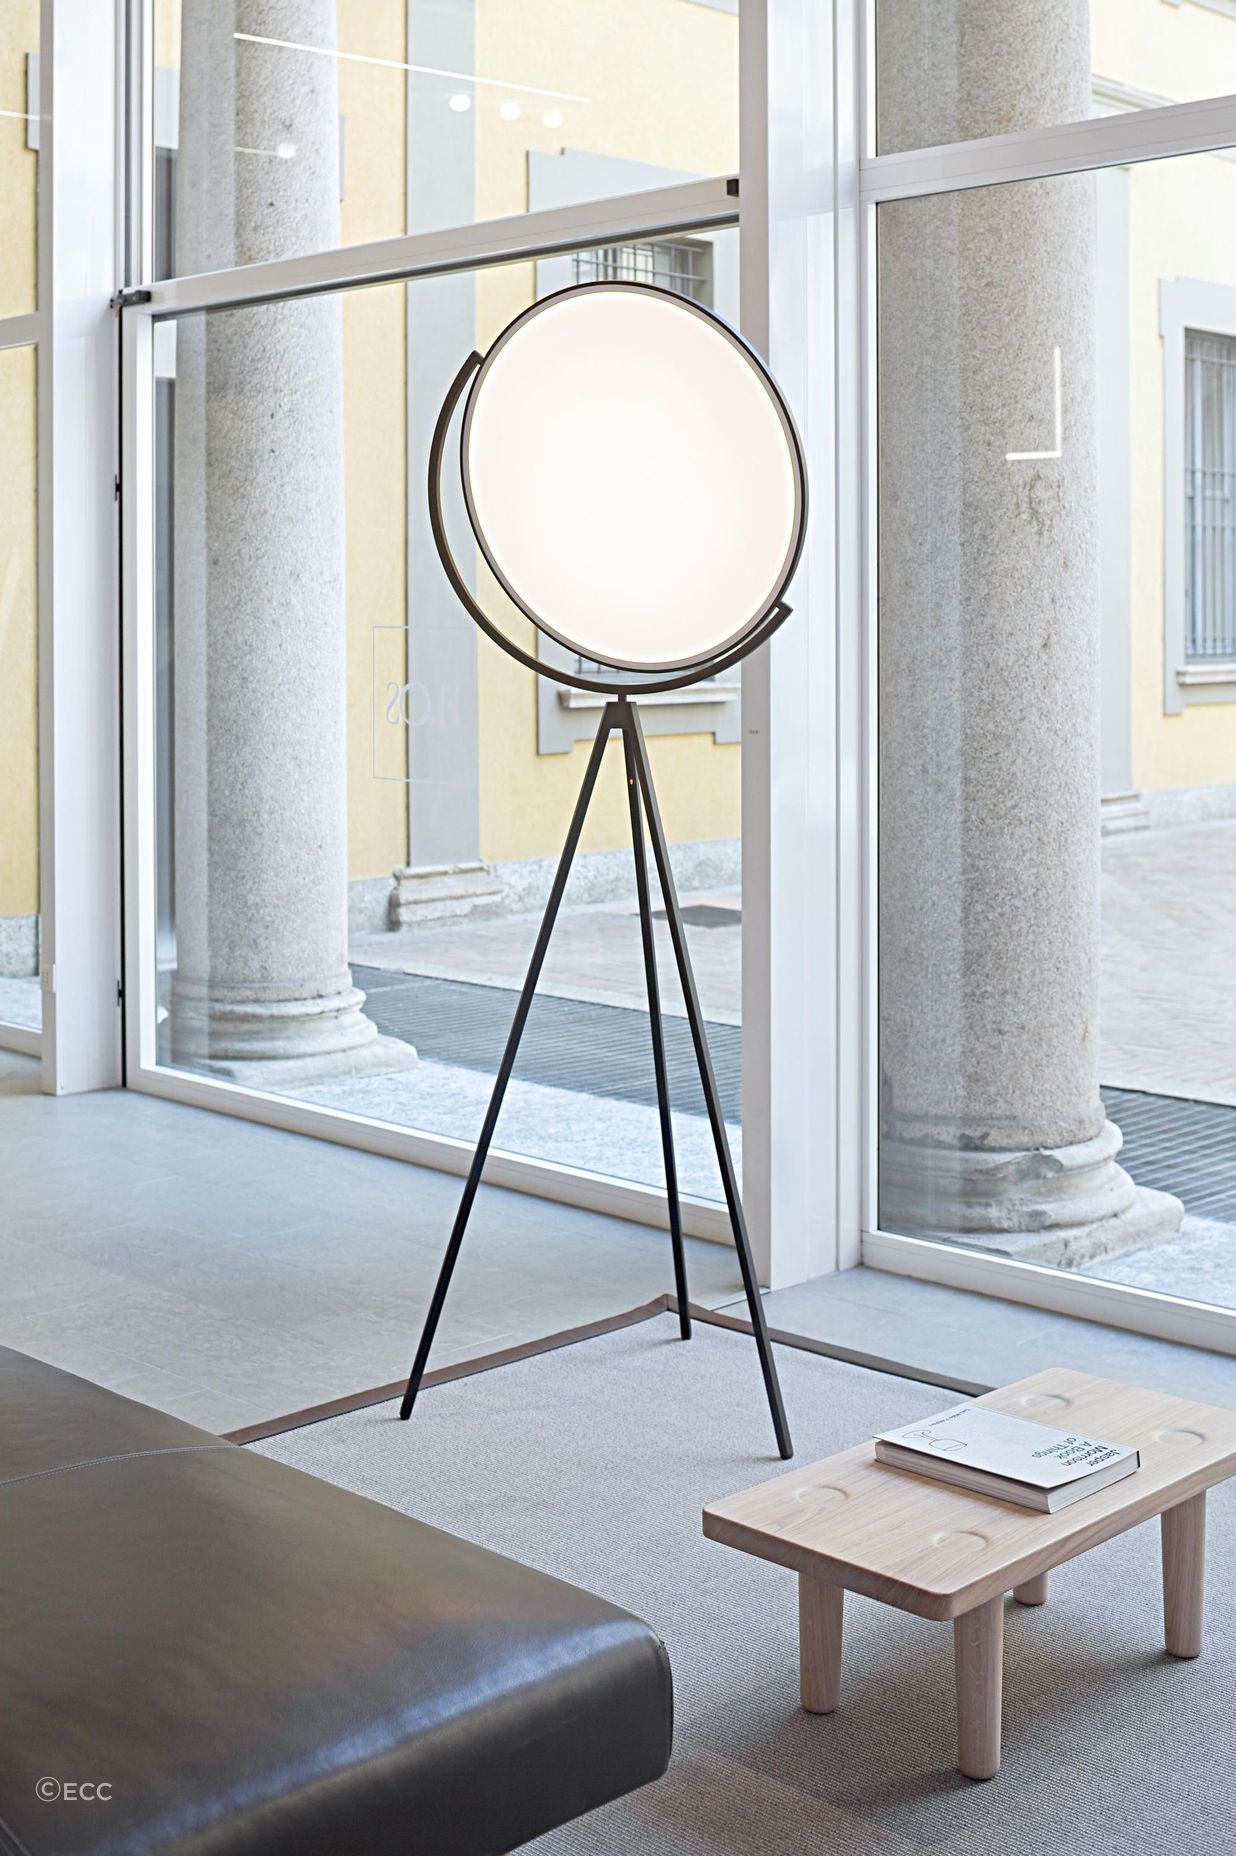 The dynamic and daring Superloon Floor Lamp by Flos